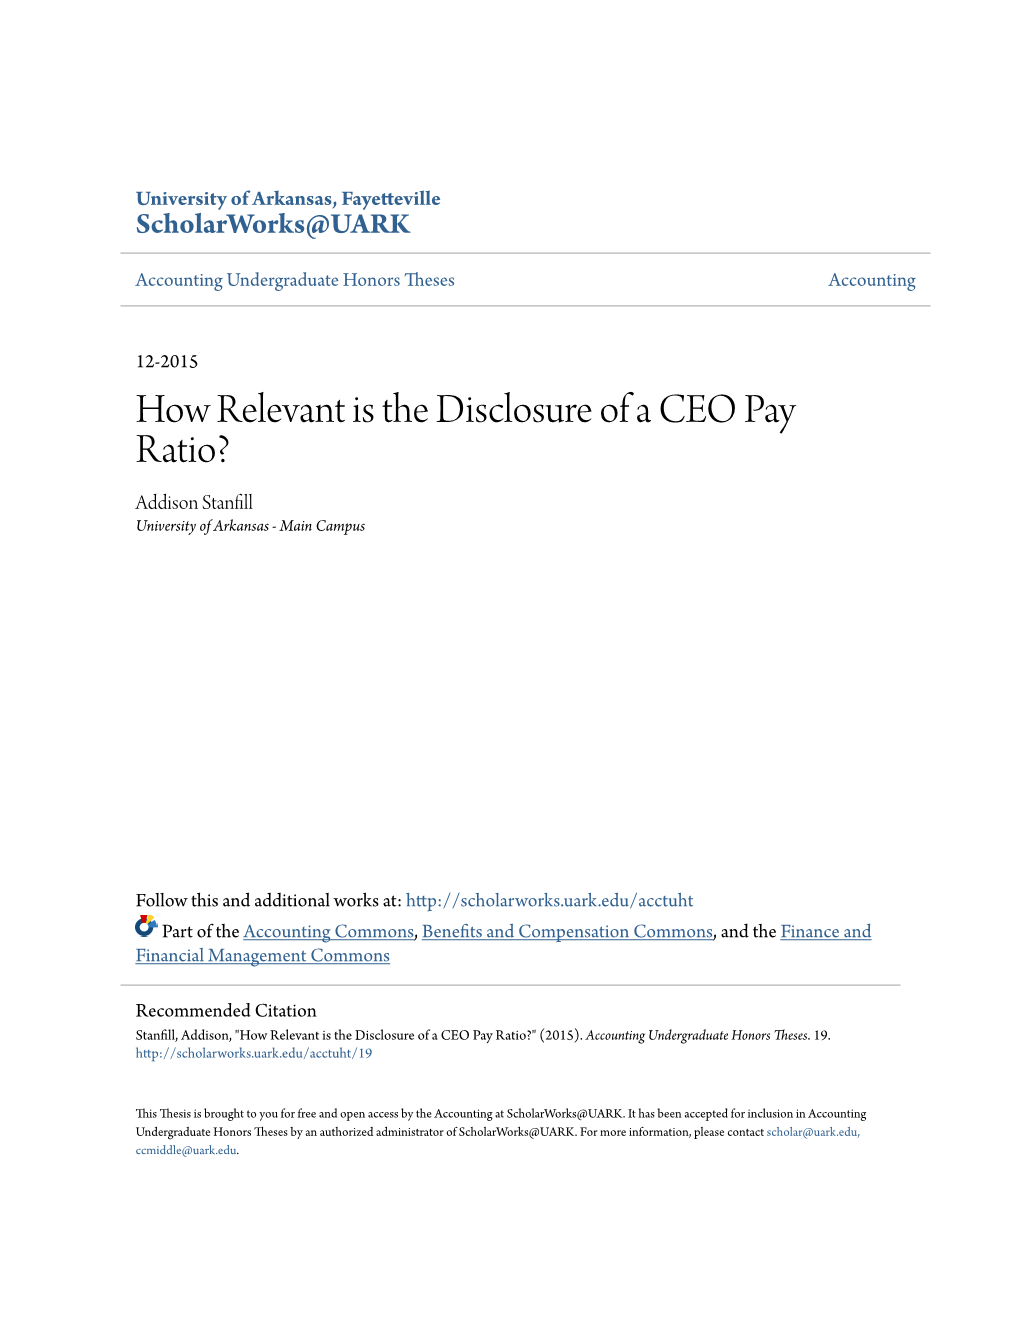 How Relevant Is the Disclosure of a CEO Pay Ratio? Addison Stanfill University of Arkansas - Main Campus